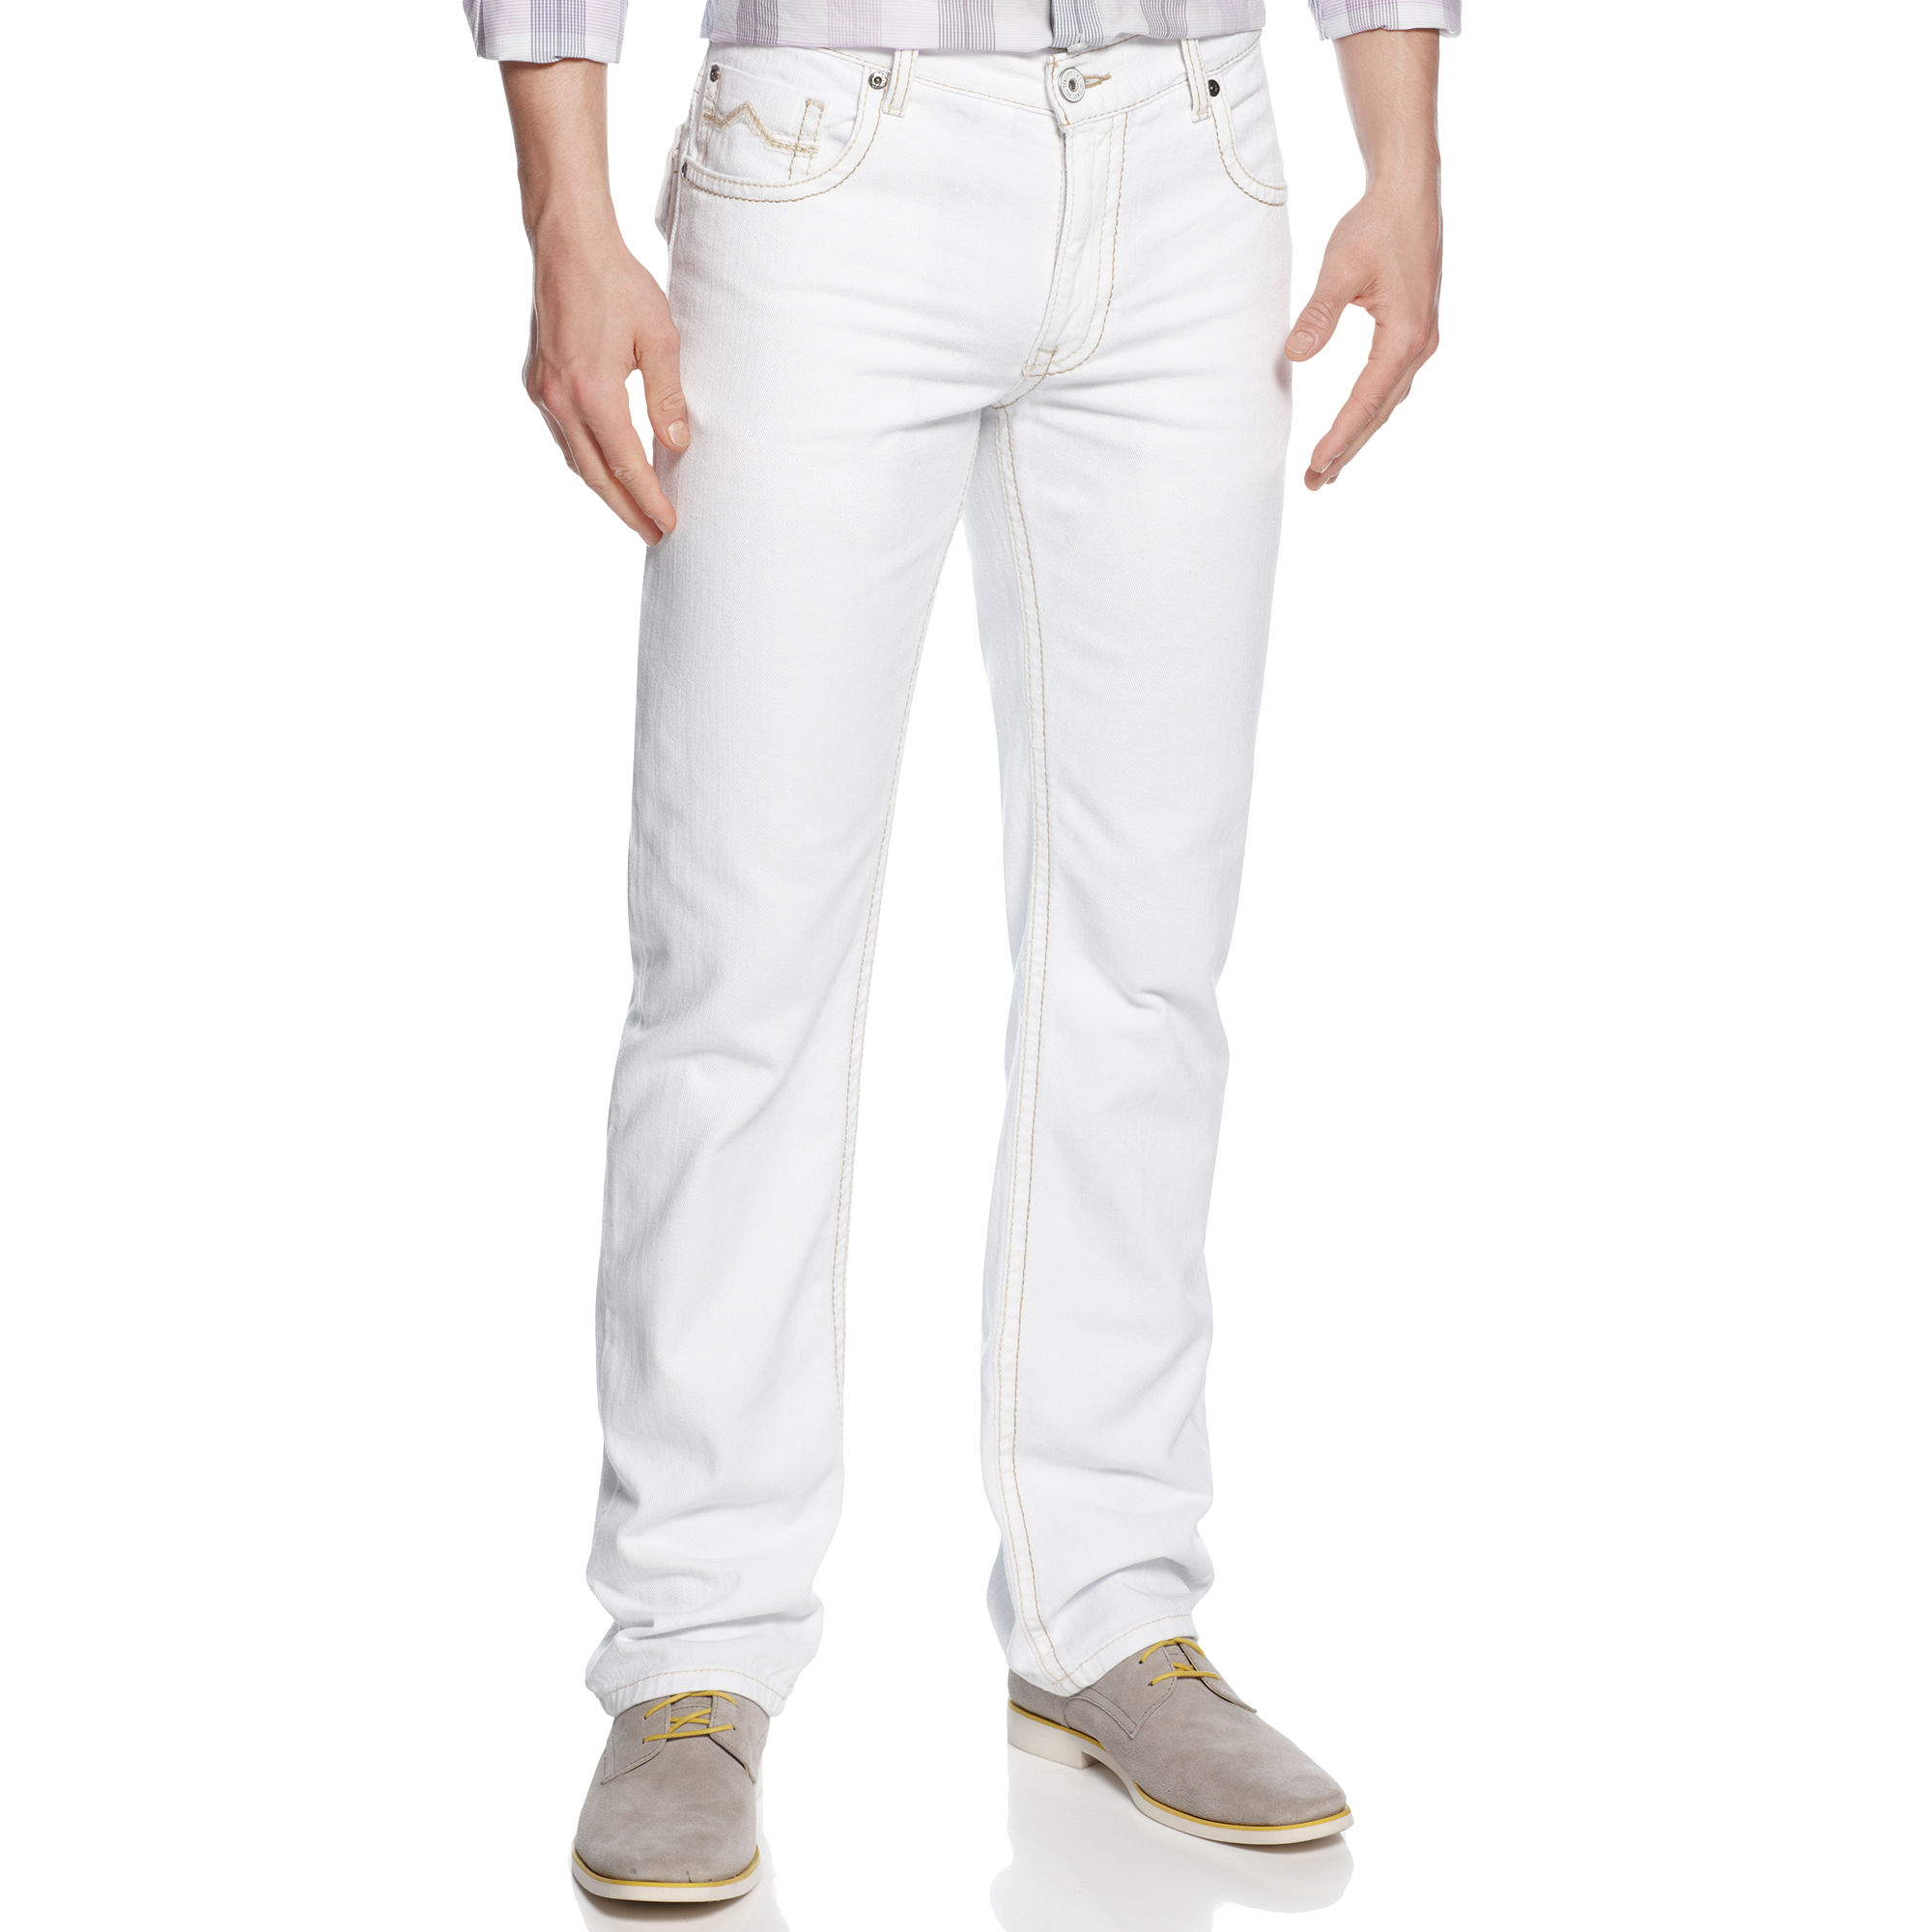 Lyst - Inc International Concepts Bowdoin Lowrise Bootcut Jeans in ...